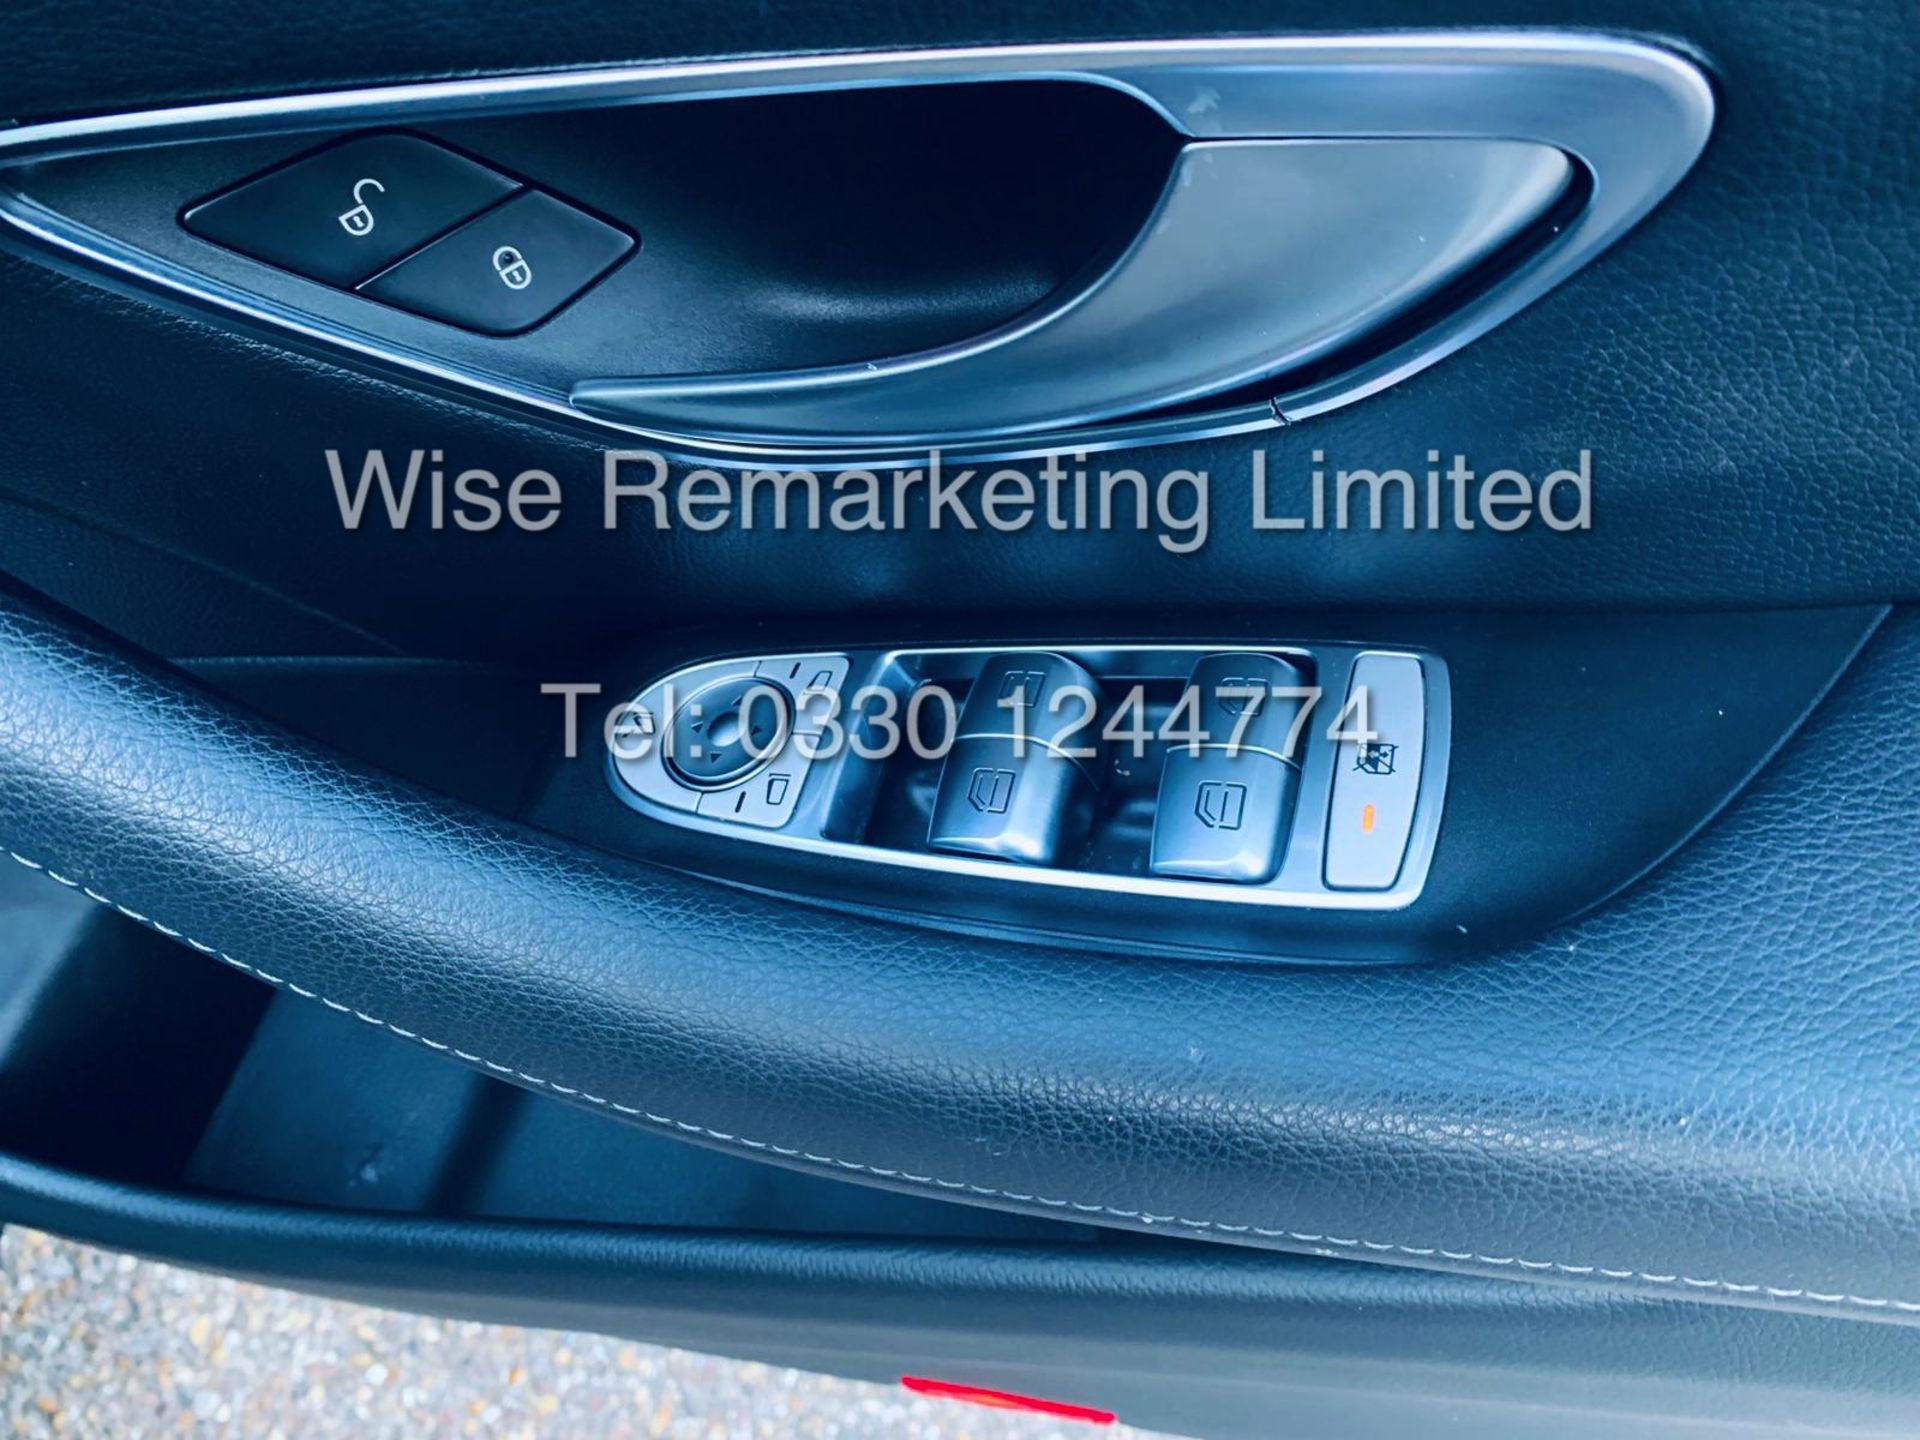 MERCEDES E CLASS ESTATE E220D AMG LINE 2017 / 9G -TRONIC / *LOW MILES* / 1 OWNER - Image 32 of 42